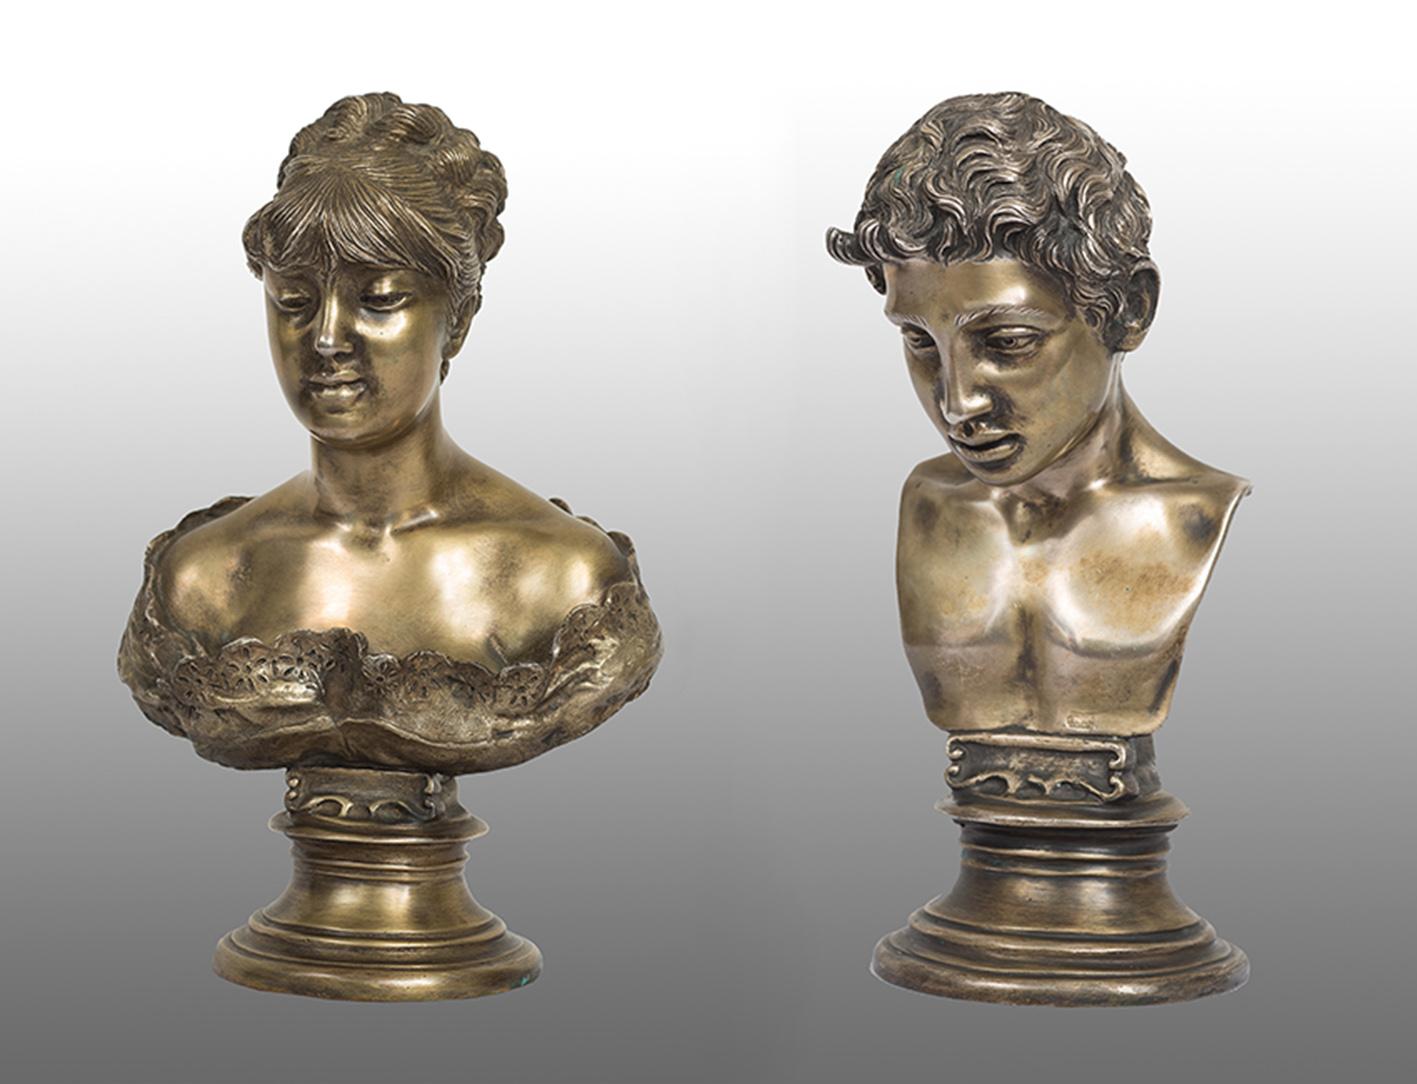 Unknown Figurative Sculpture - Pair of antique solid silver sculptures signed Gemito.